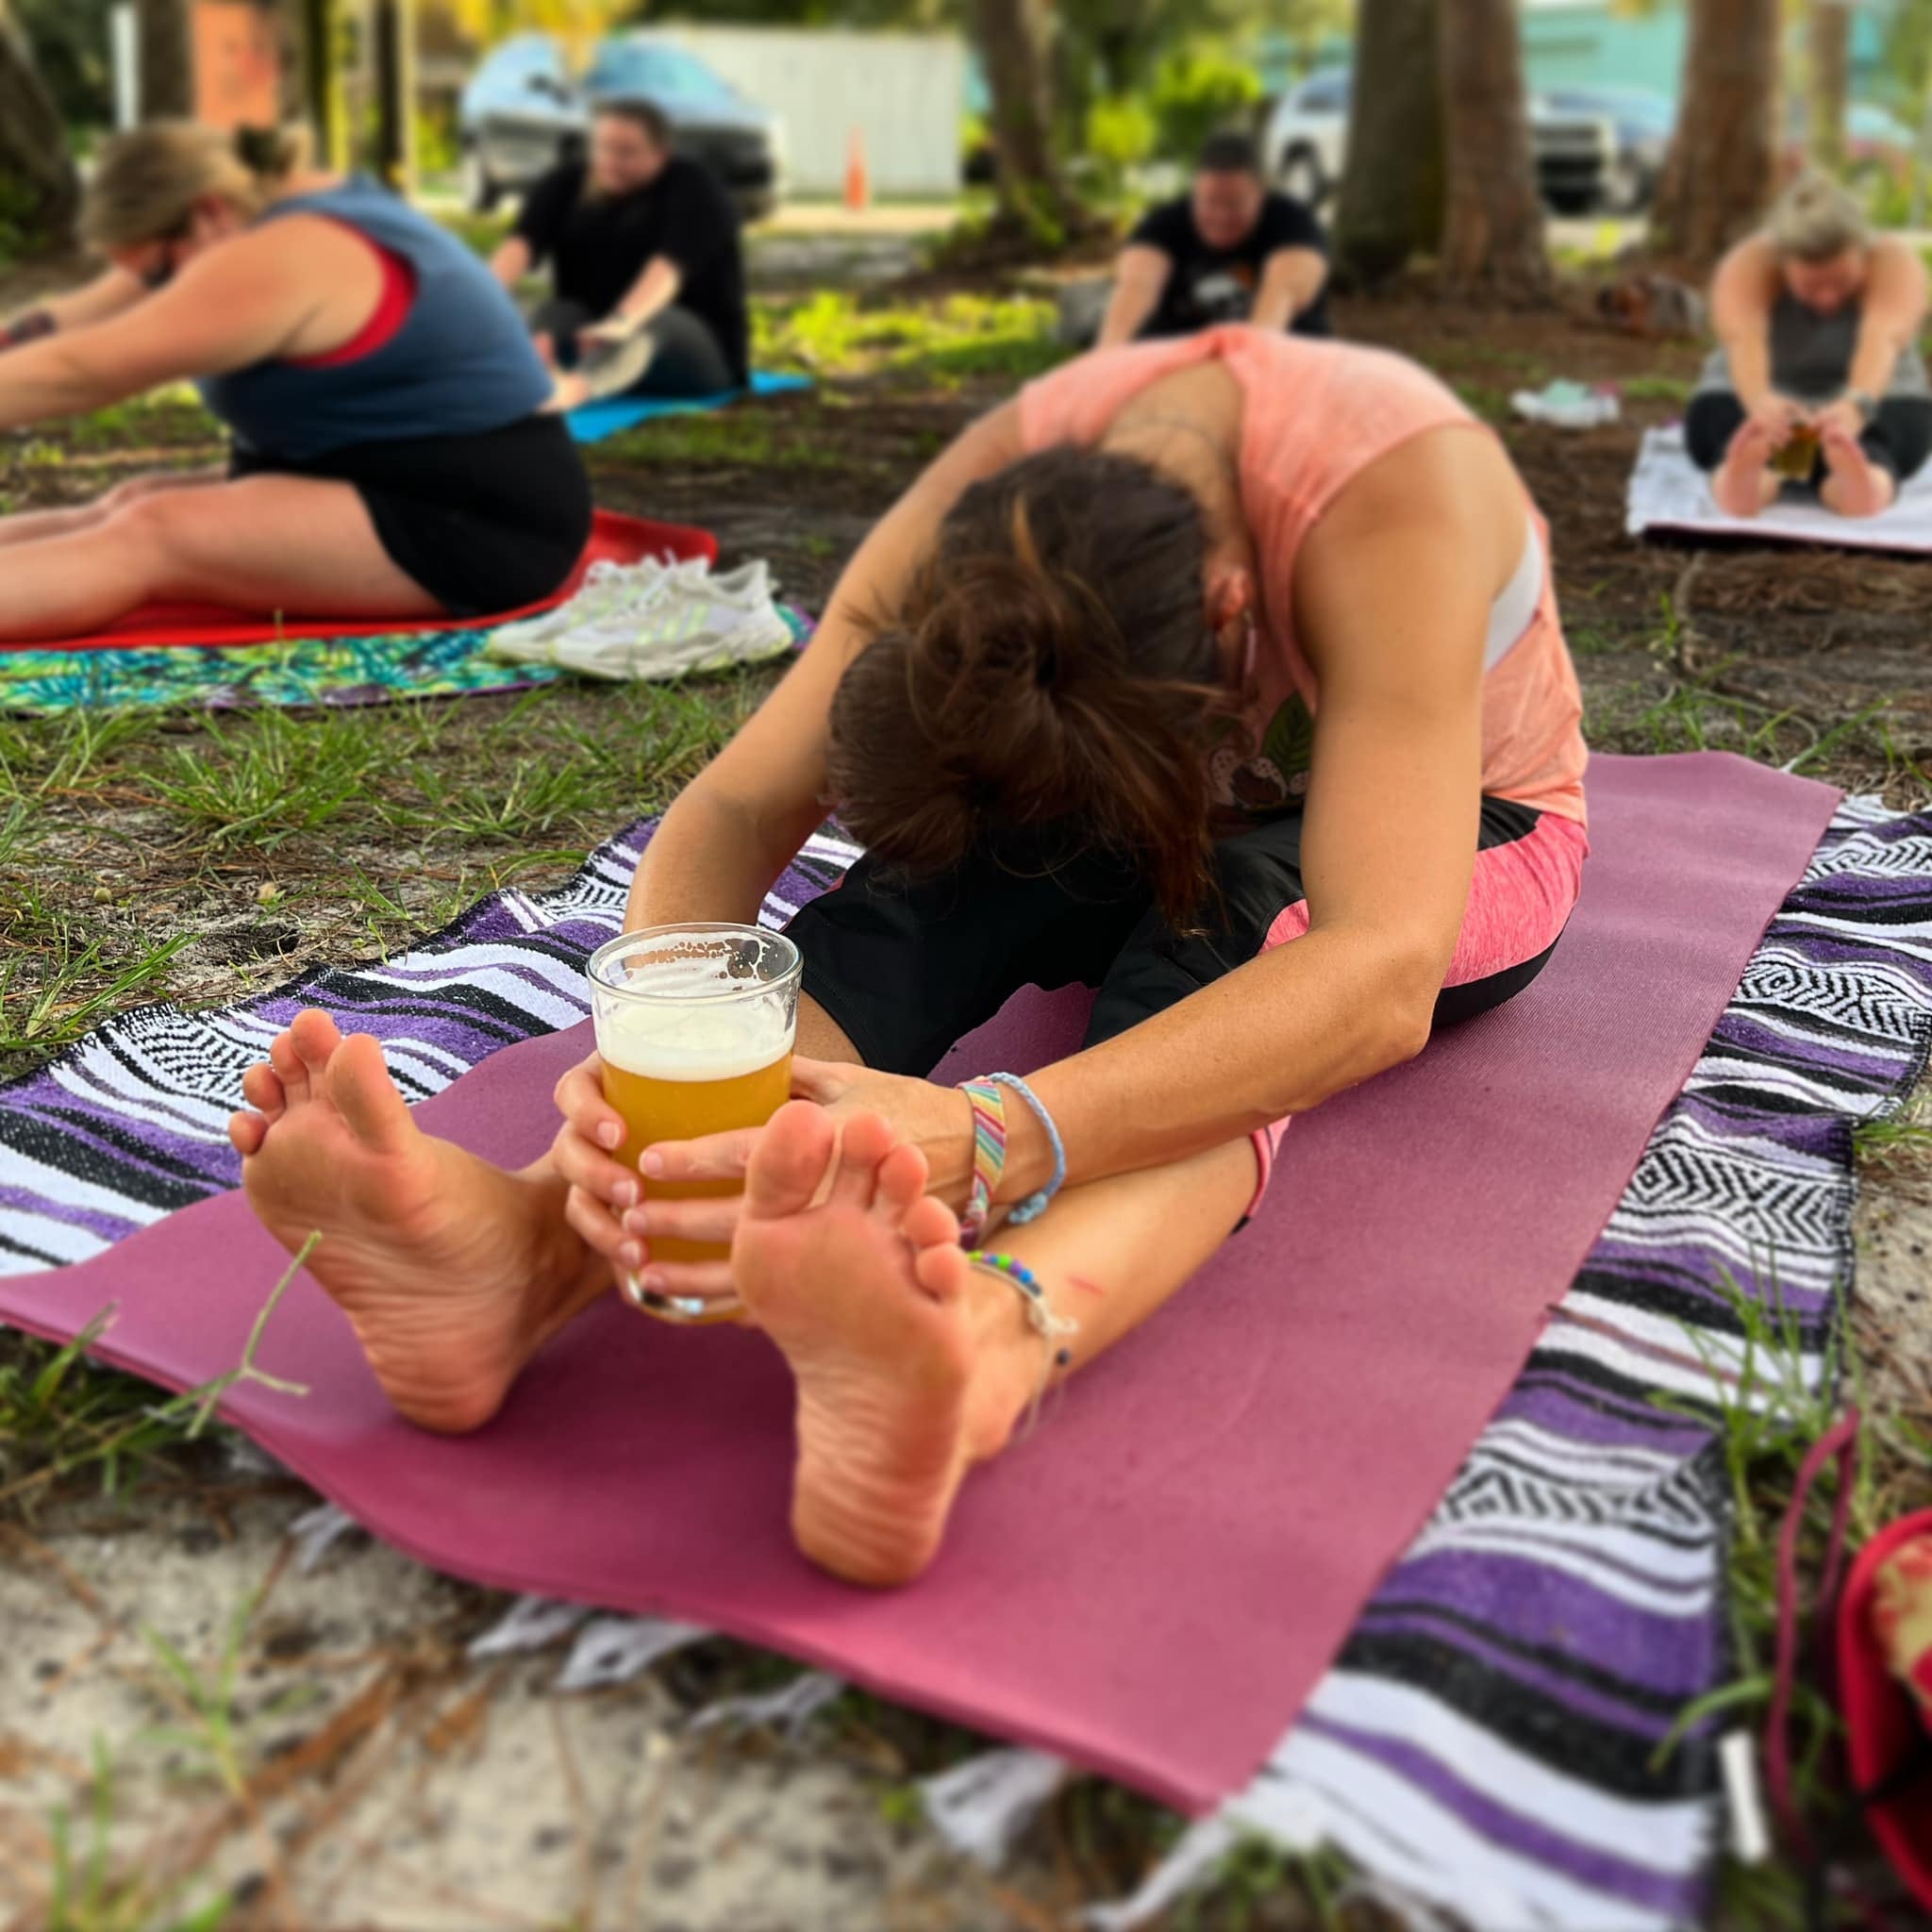 Yoga and Beer: An Unlikely Match - Eater